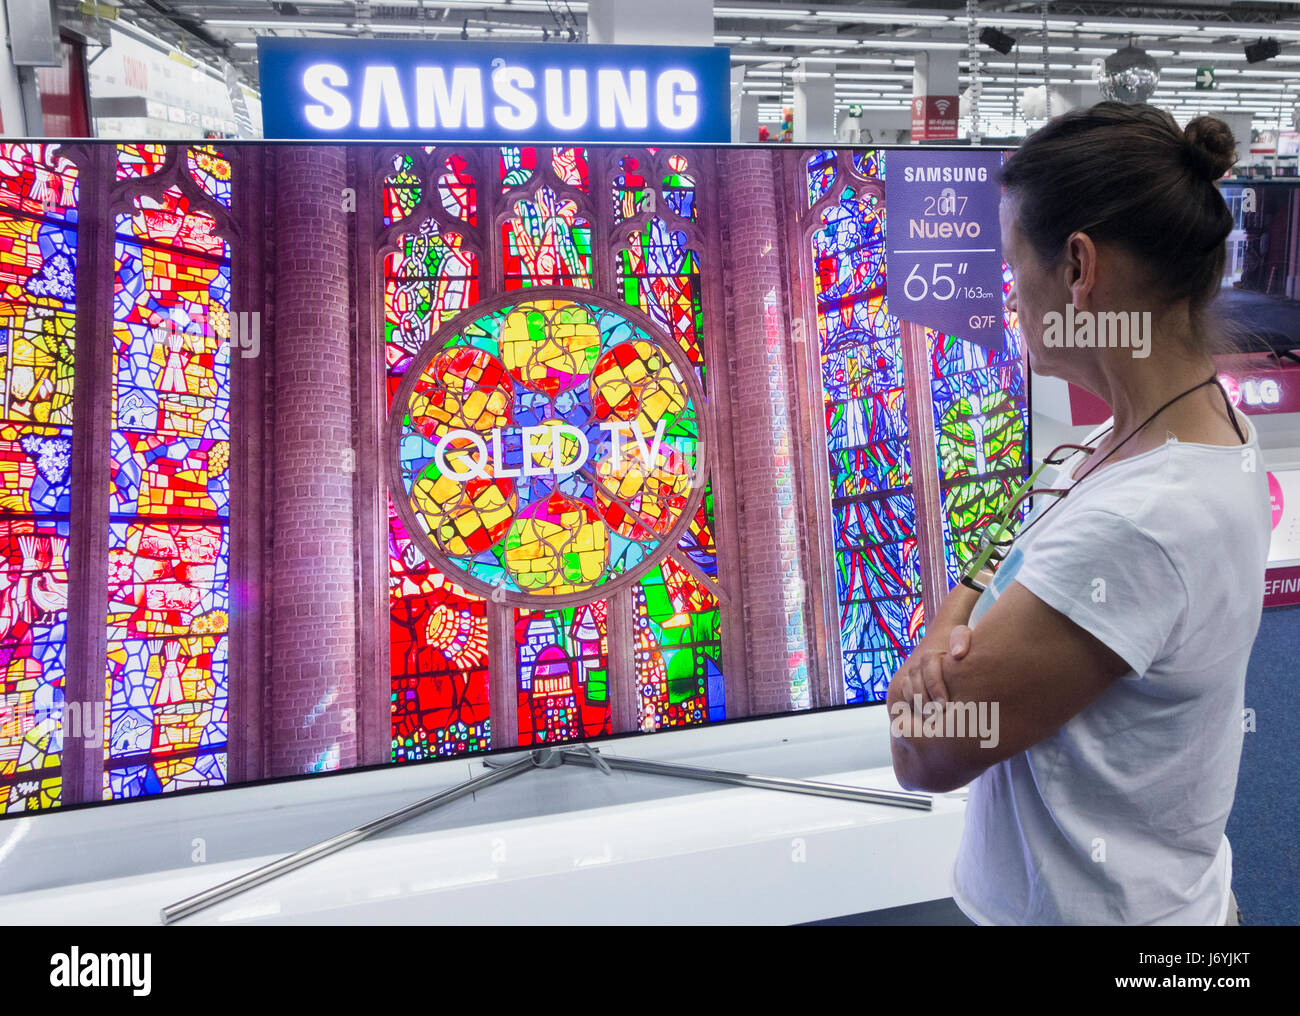 Woman looking at Samsung QLED TV in electrical store. Stock Photo